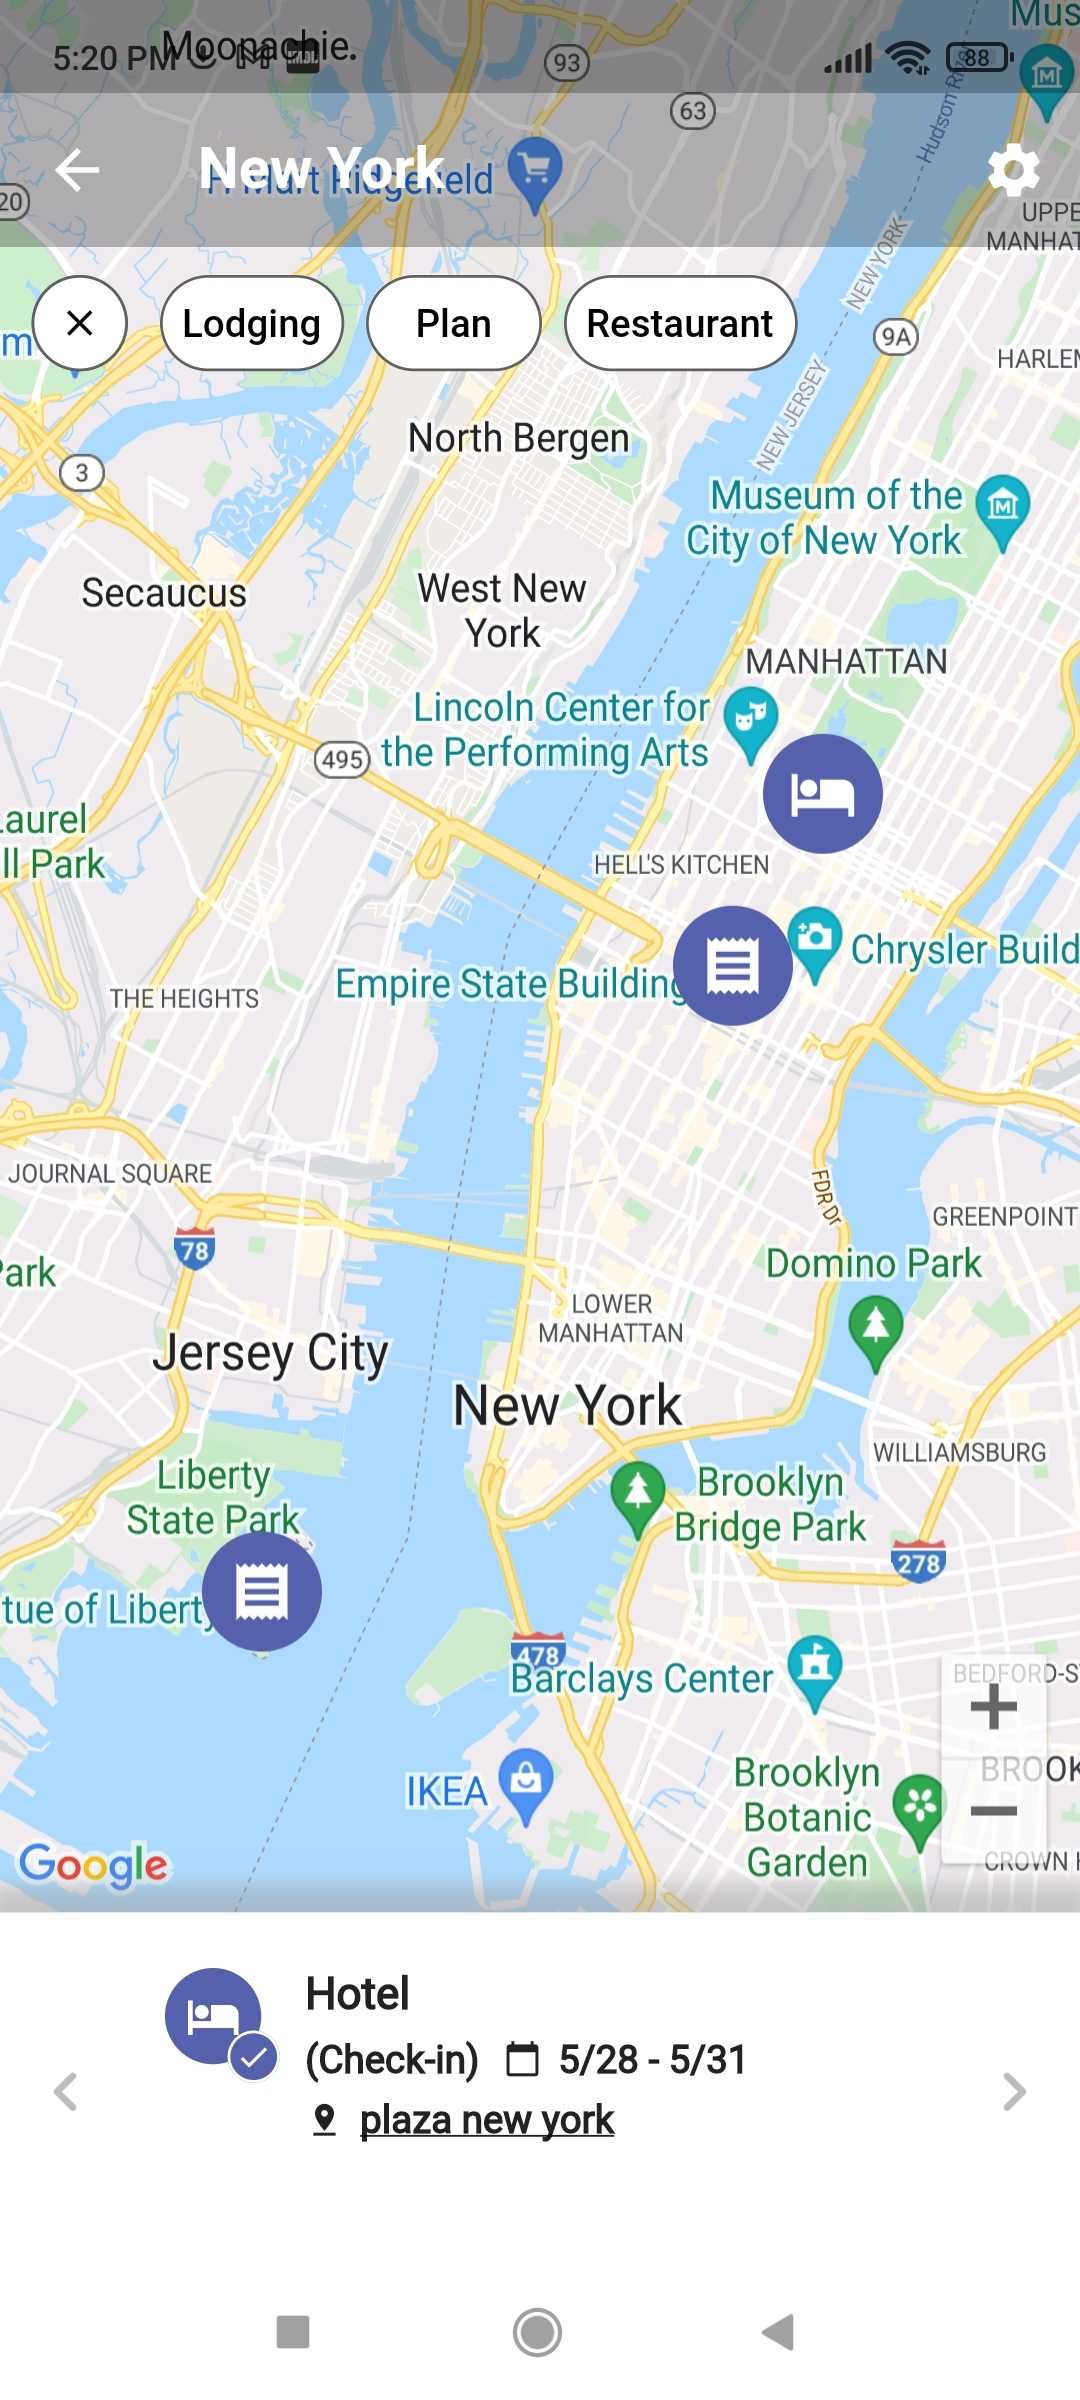 Plip's map view shows every place you are planning to visit on your trip in a convenient map view